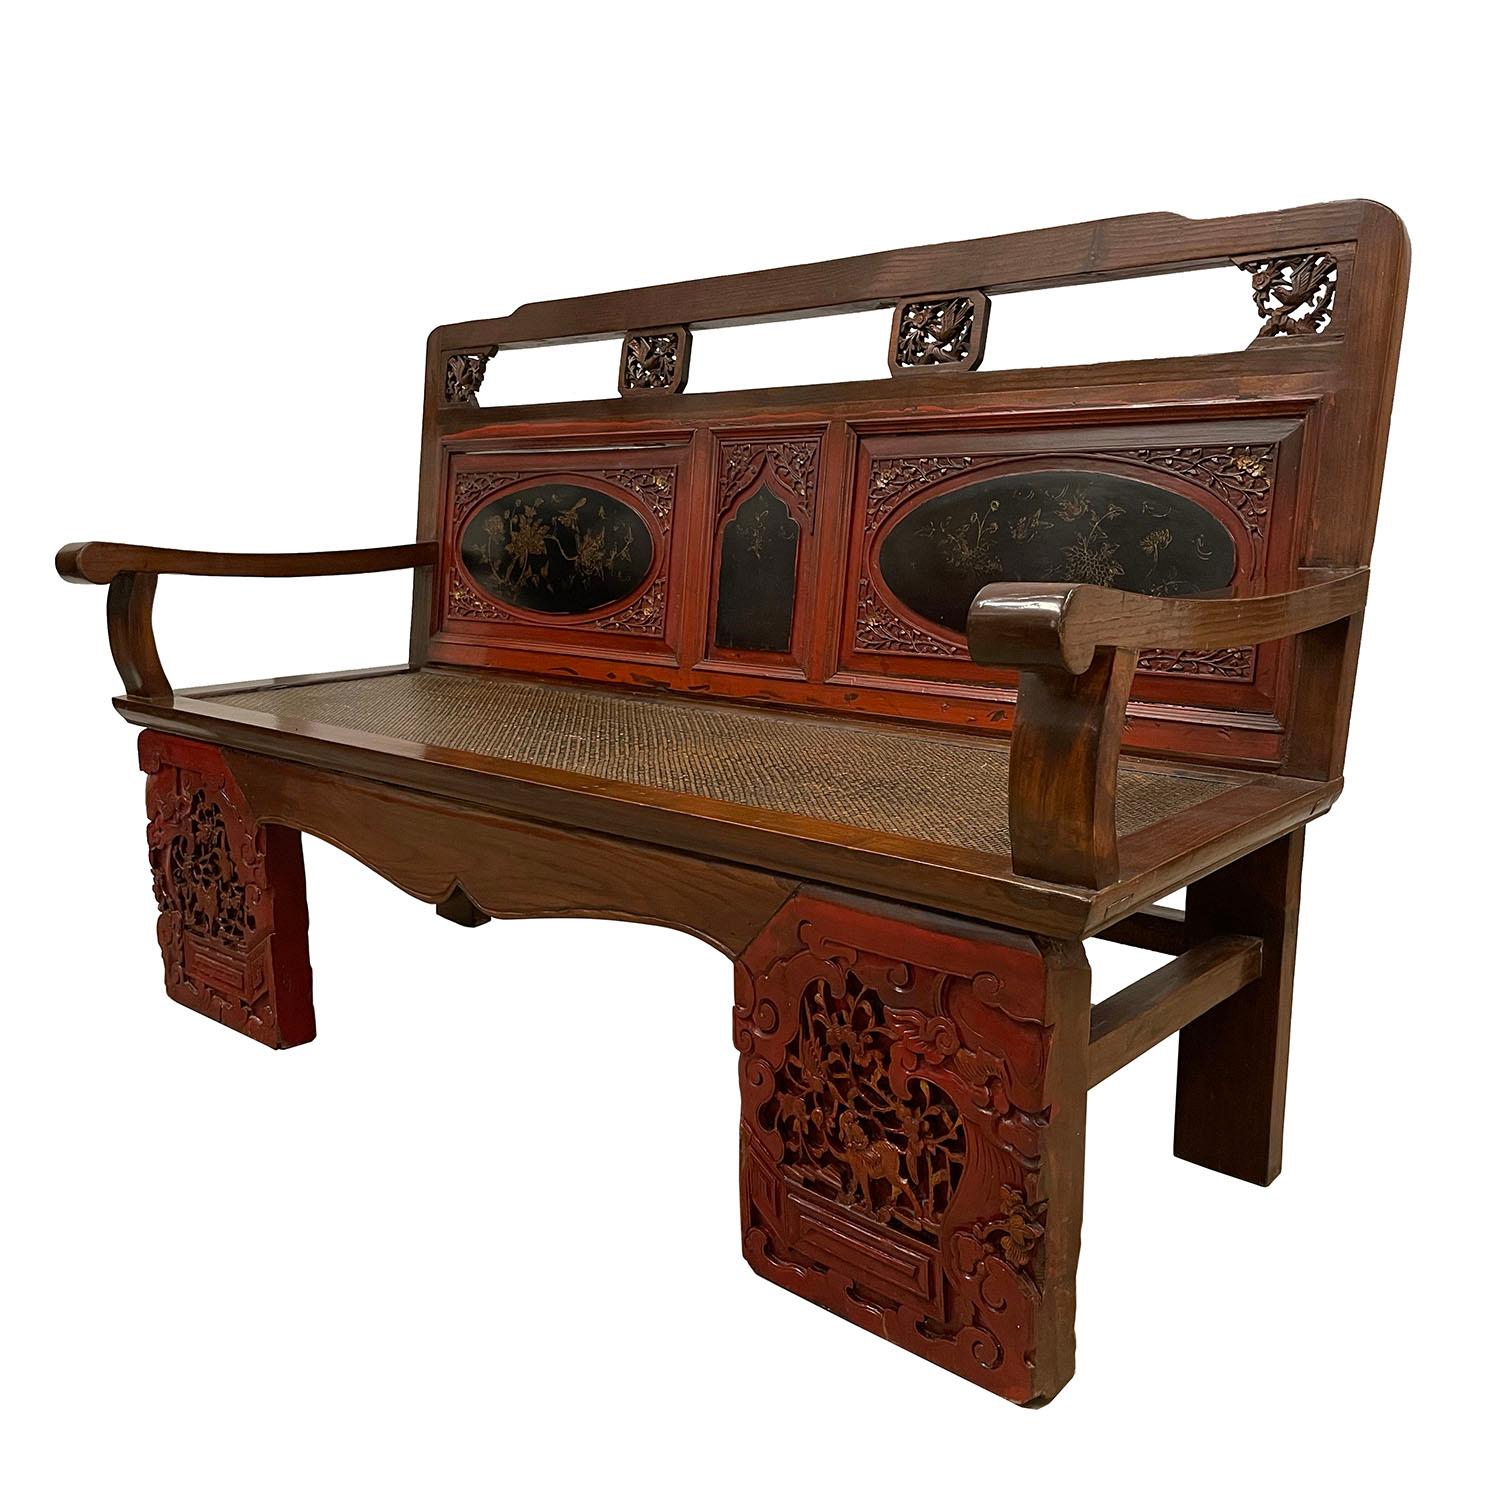 Size: 37in H x 57in W x 22 1/2in D
Seat: 16 1/2in H x 51in W x 18in D
Origin: China
Circa: 1850- 1900
Material: Wood
Condition: Solid wood construction, Hand carved, heavy, sturdy, well balanced. Normal age wear

Description: Look at this